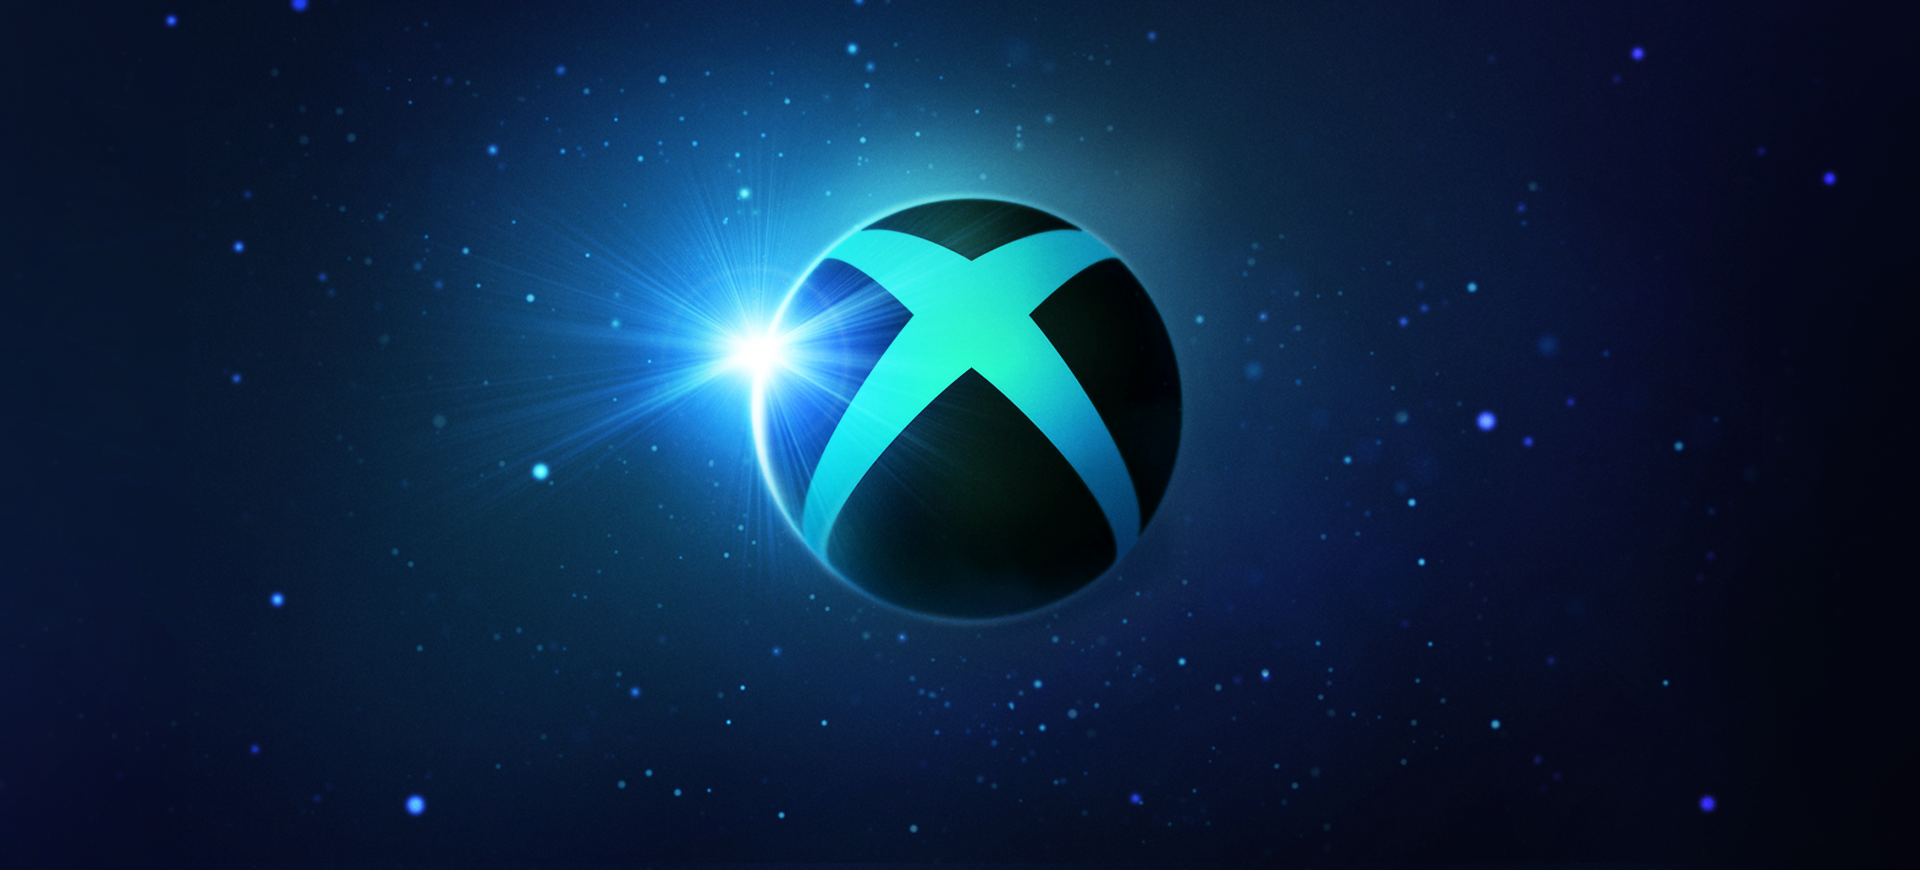 What Time To Watch The Xbox Developer Direct, And What To Expect